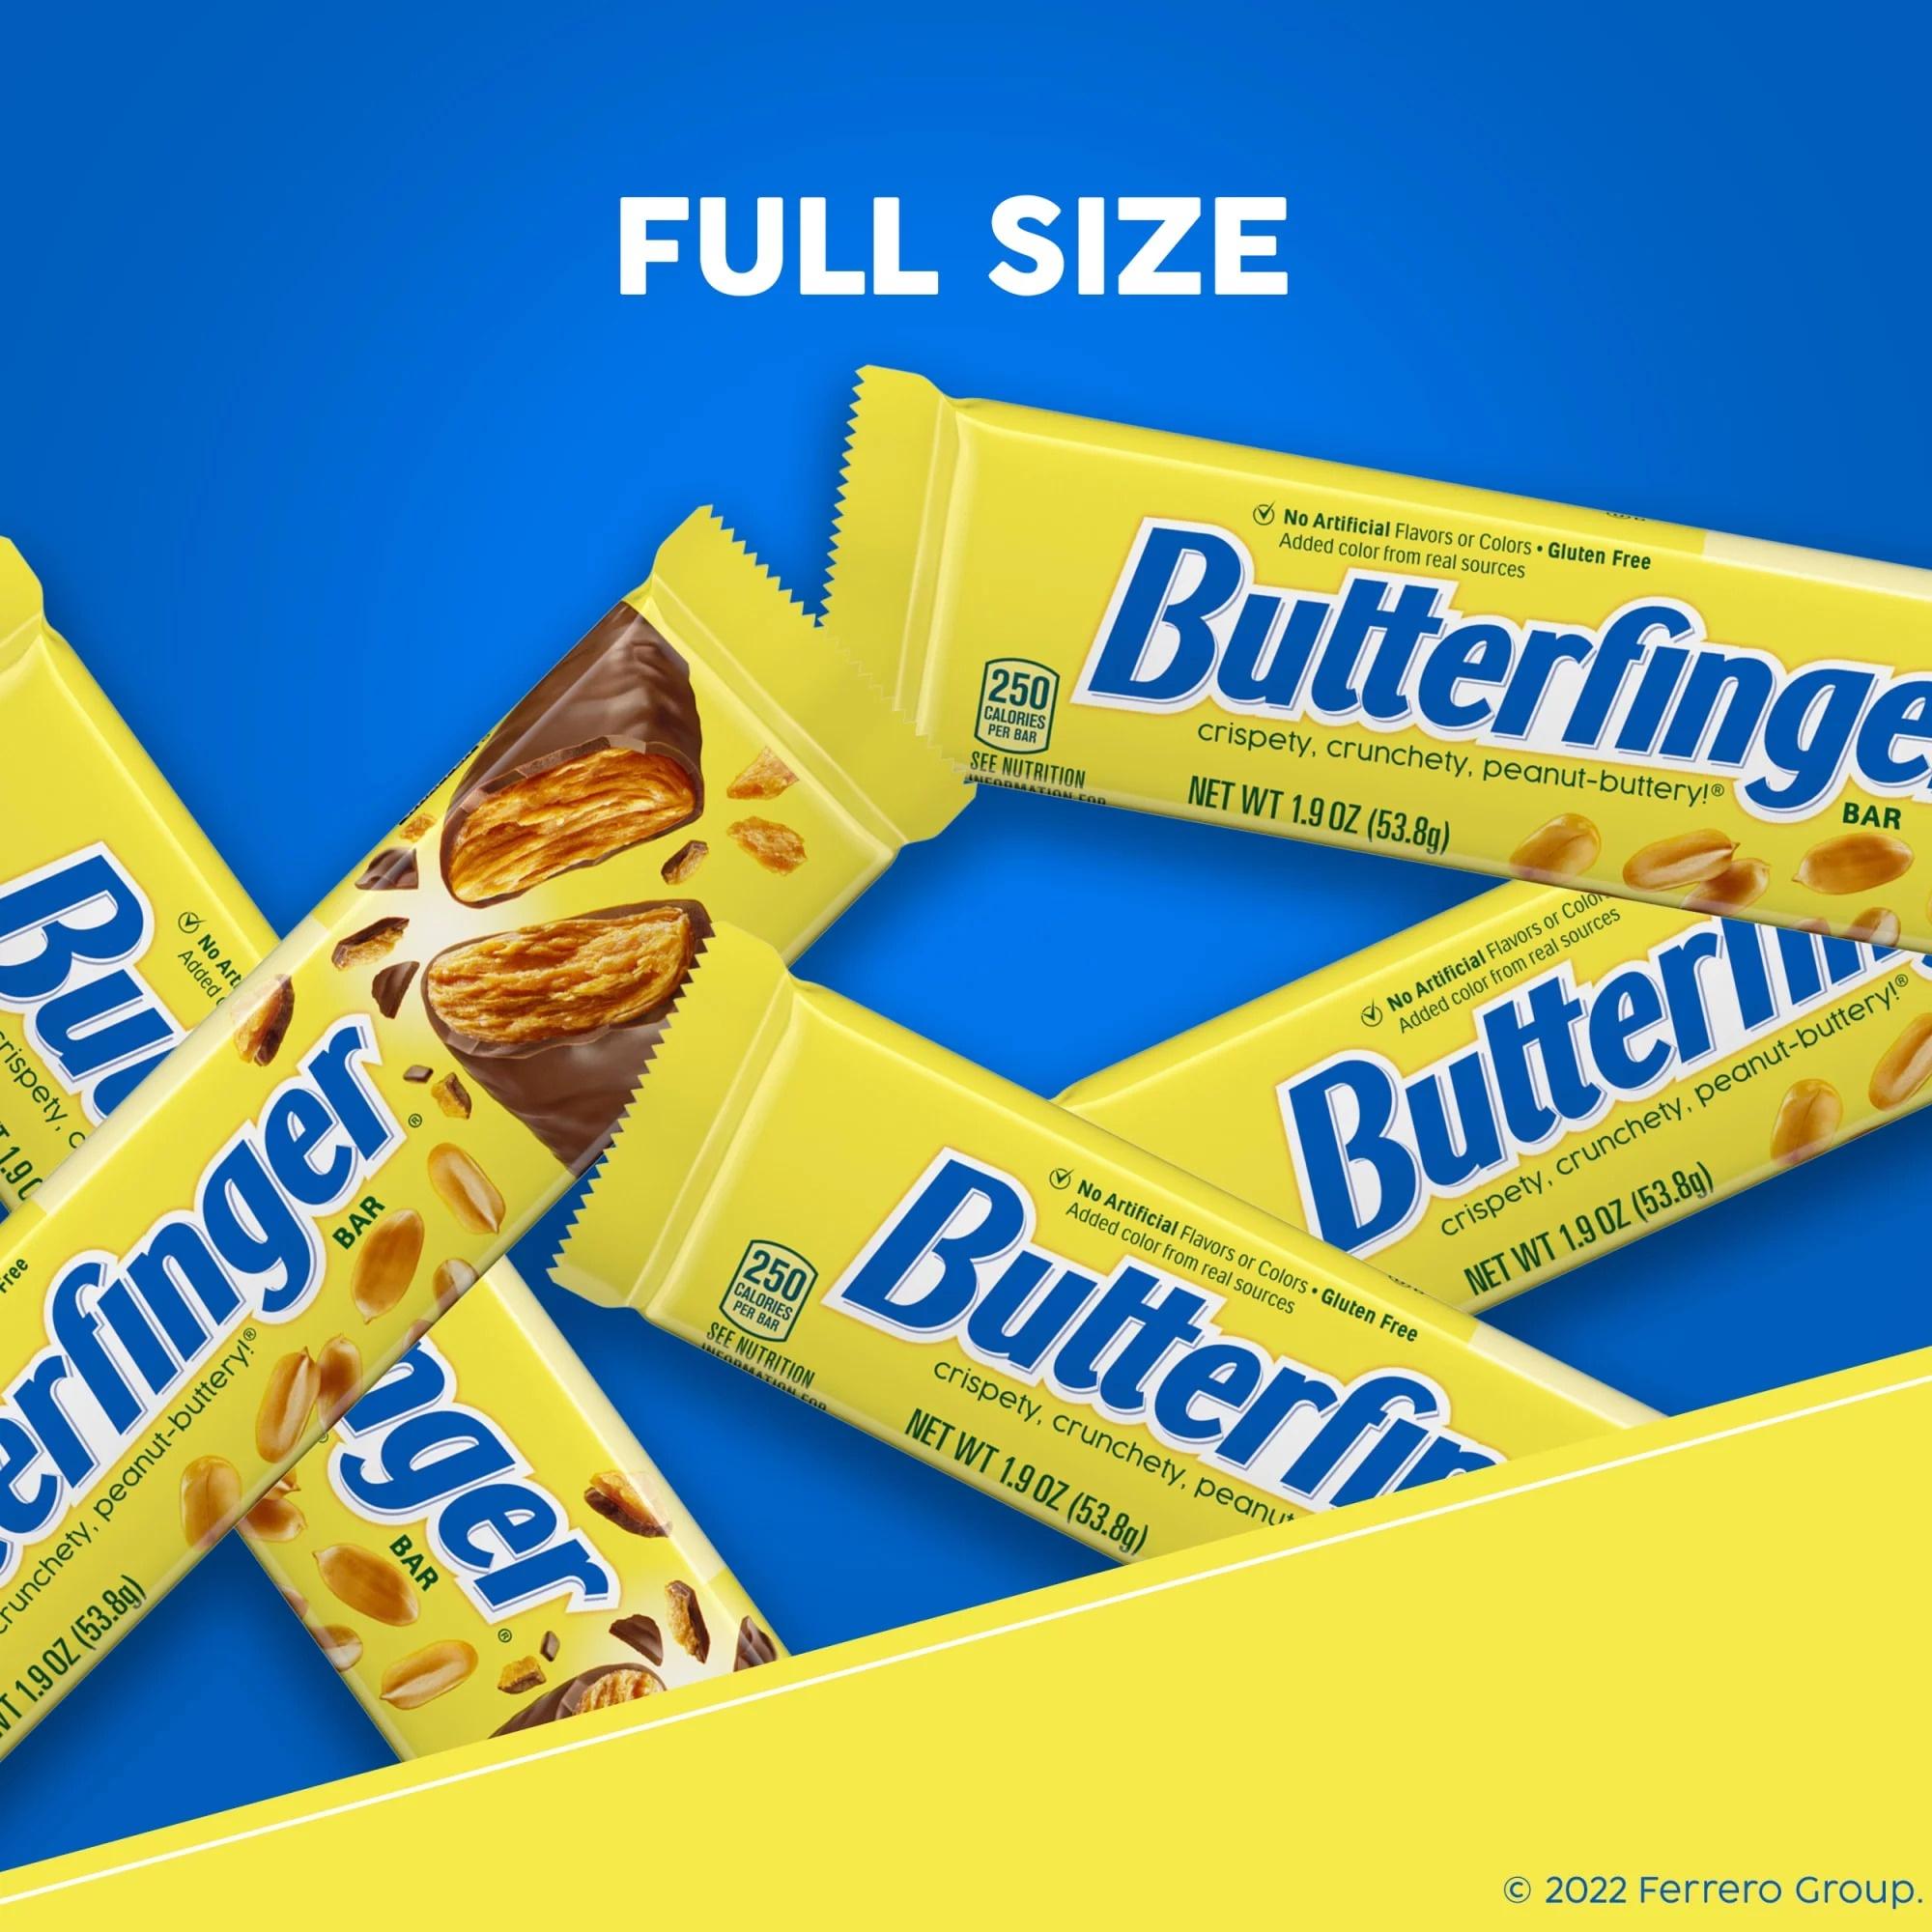 4 Pack of Butterfinger - Peanut Buttery Chocolate Candy | ( 1.9 Ounce ) a Bar | Buy from RADYAN - image 4 of 6